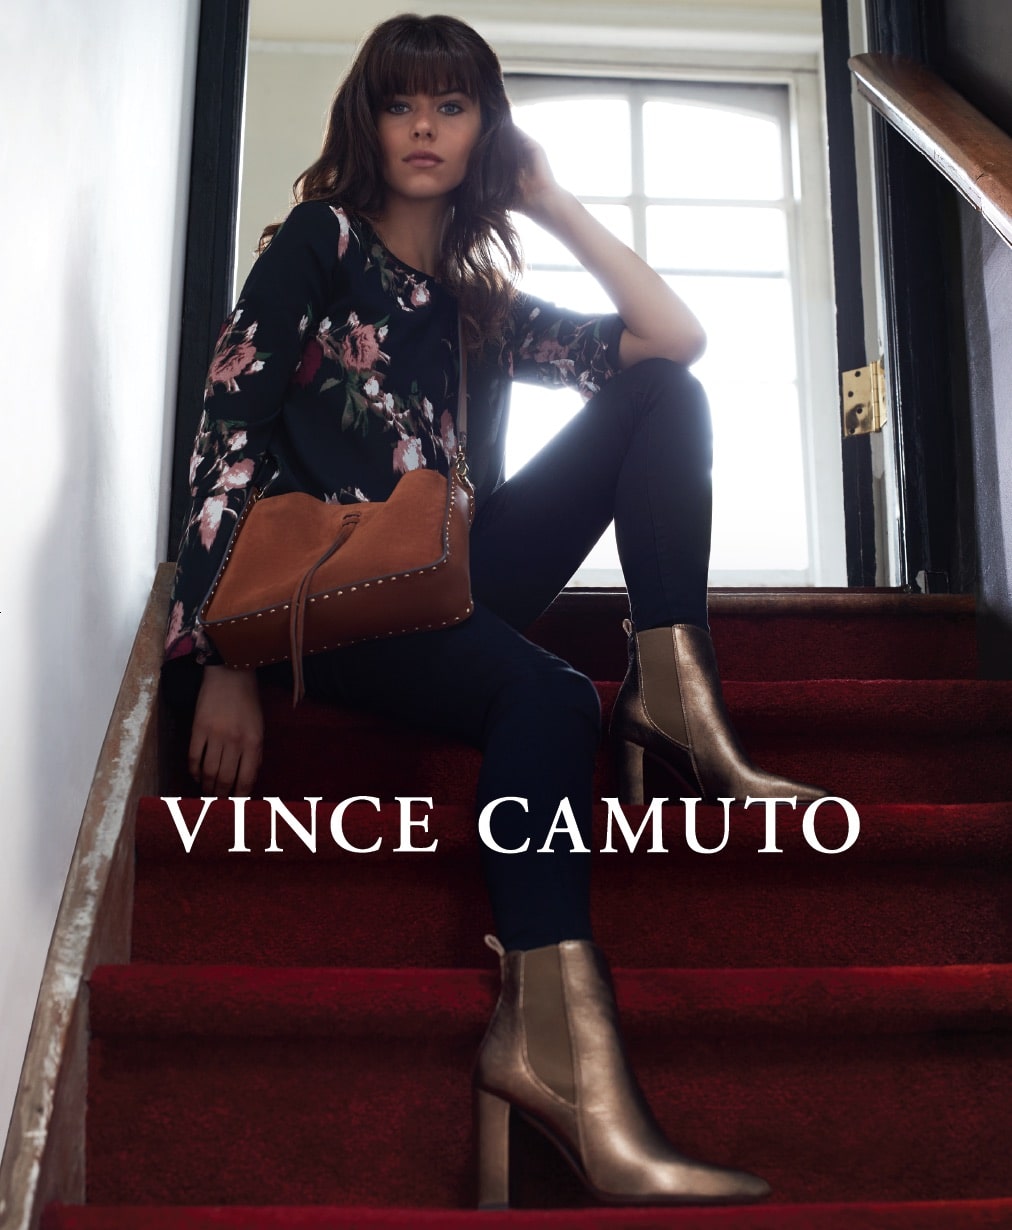 Vince Camuto to Introduce Intimate Apparel